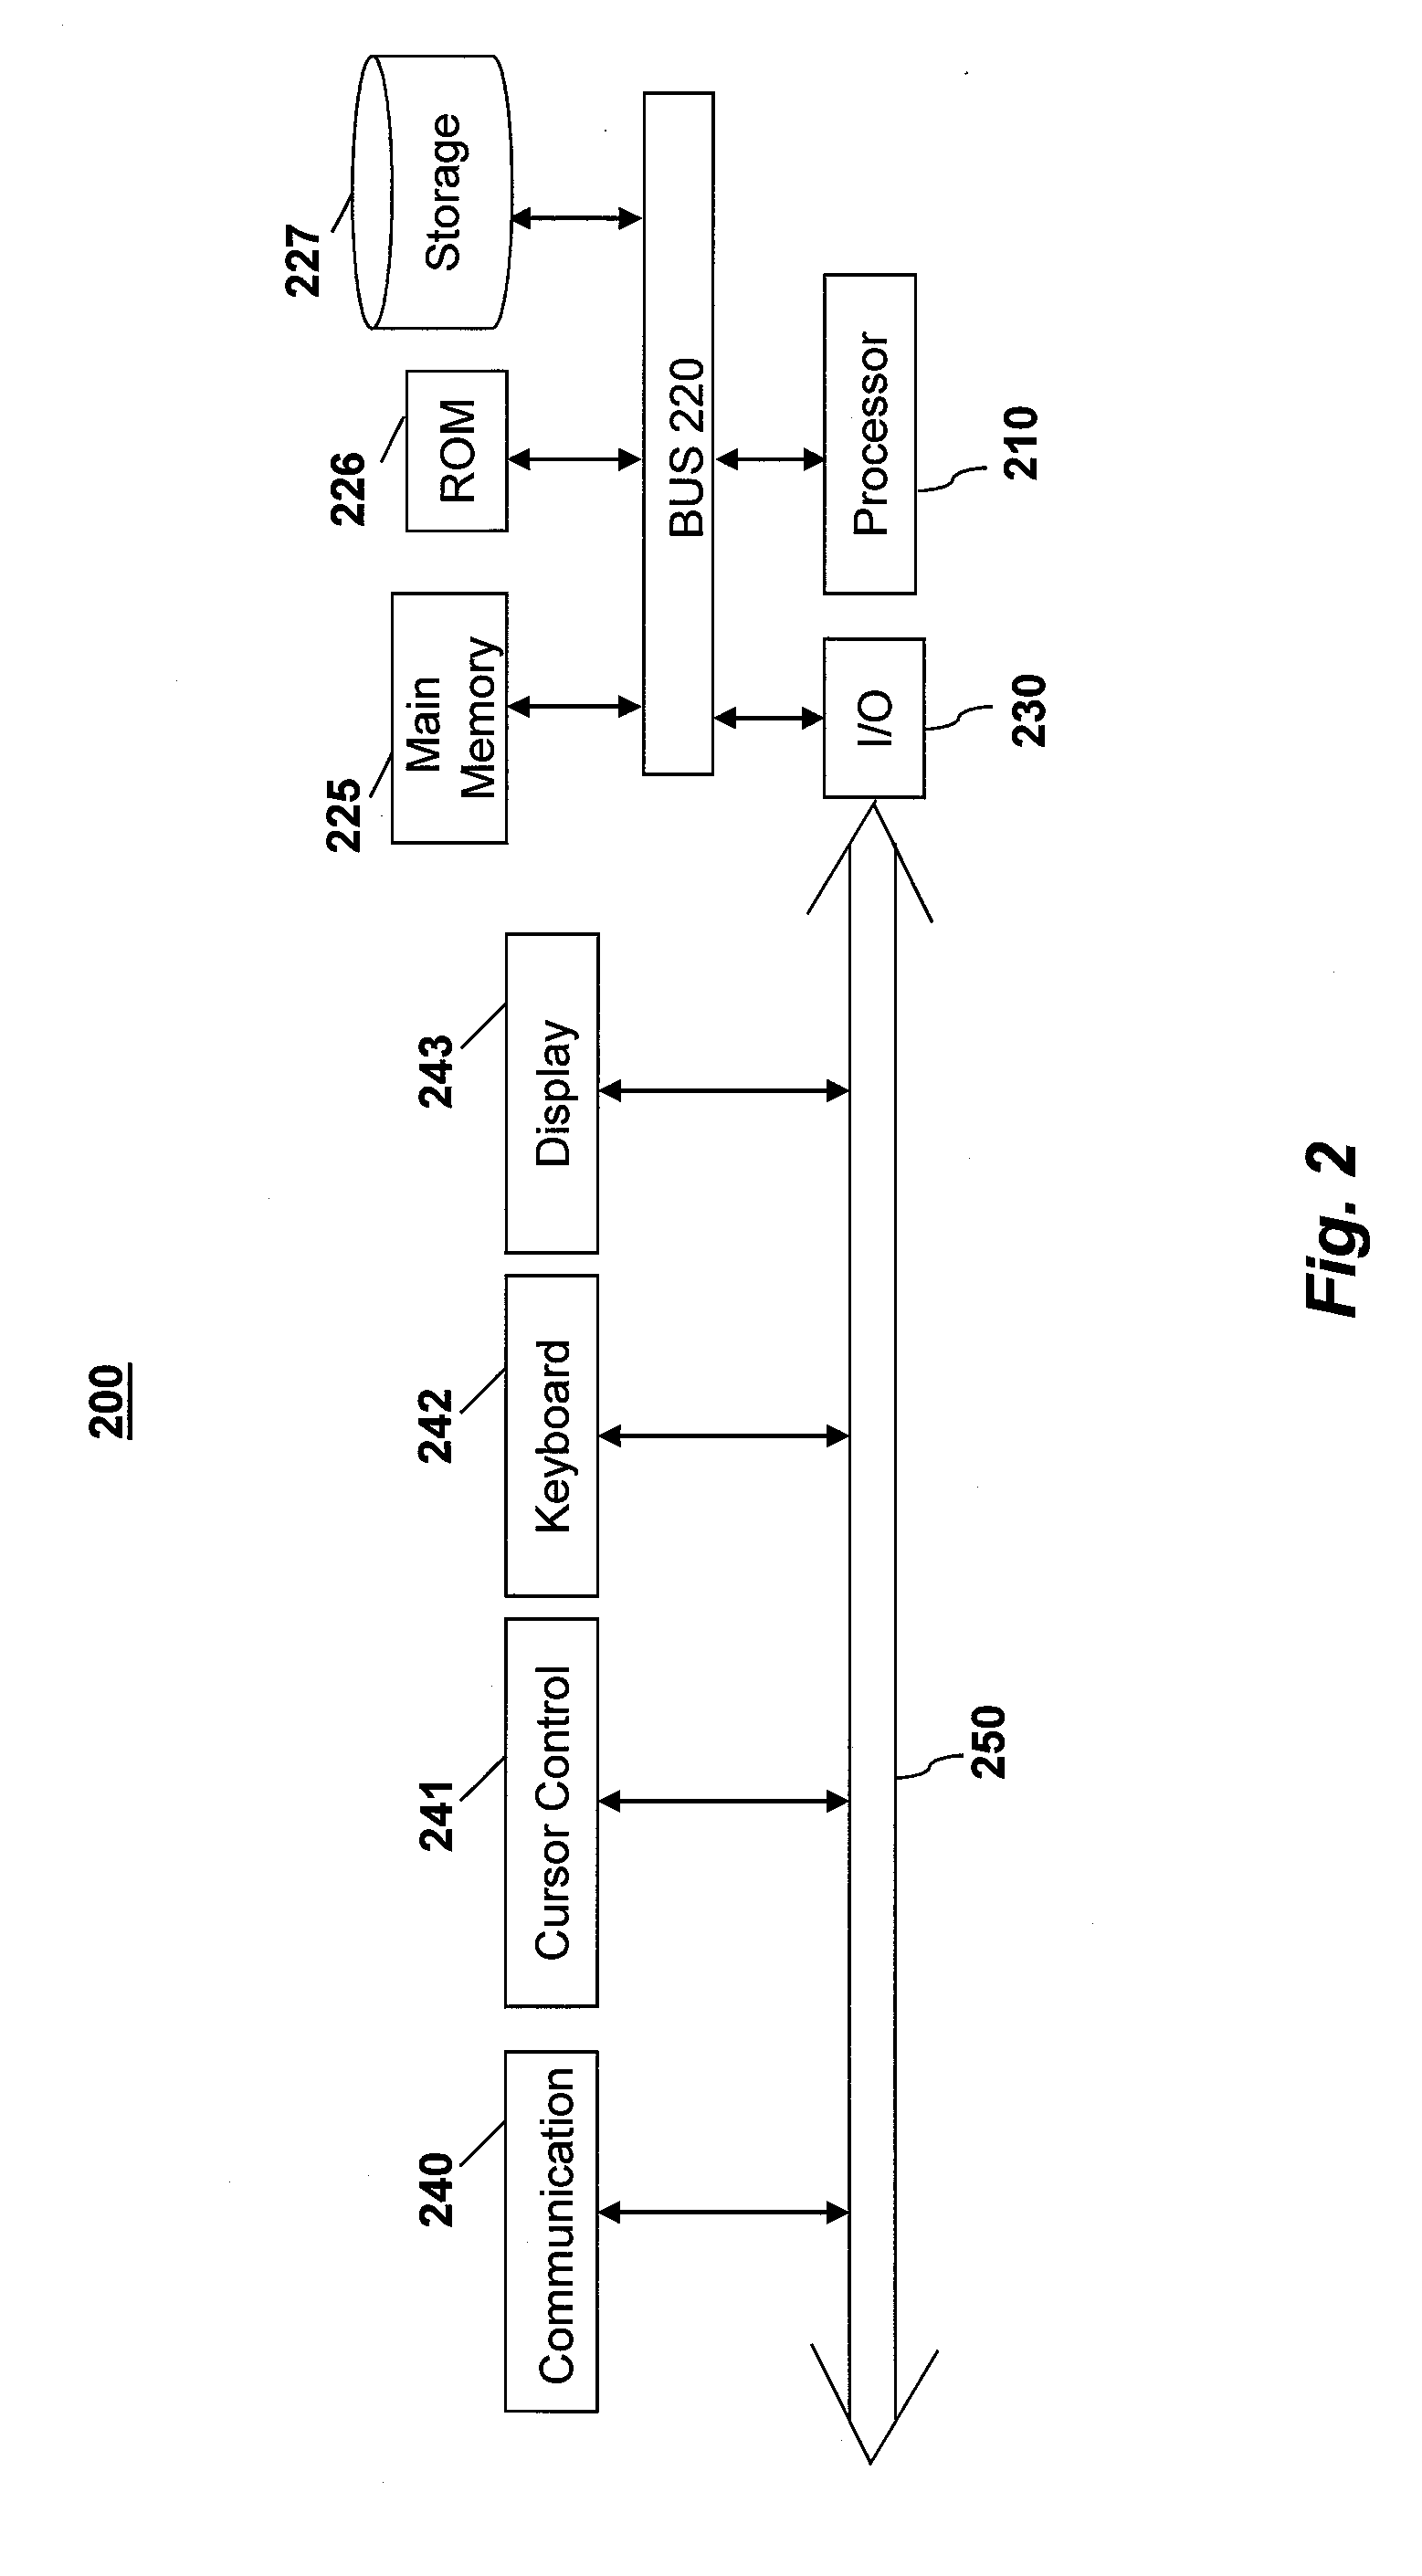 System and method for reducing the cost of efficient vehicles